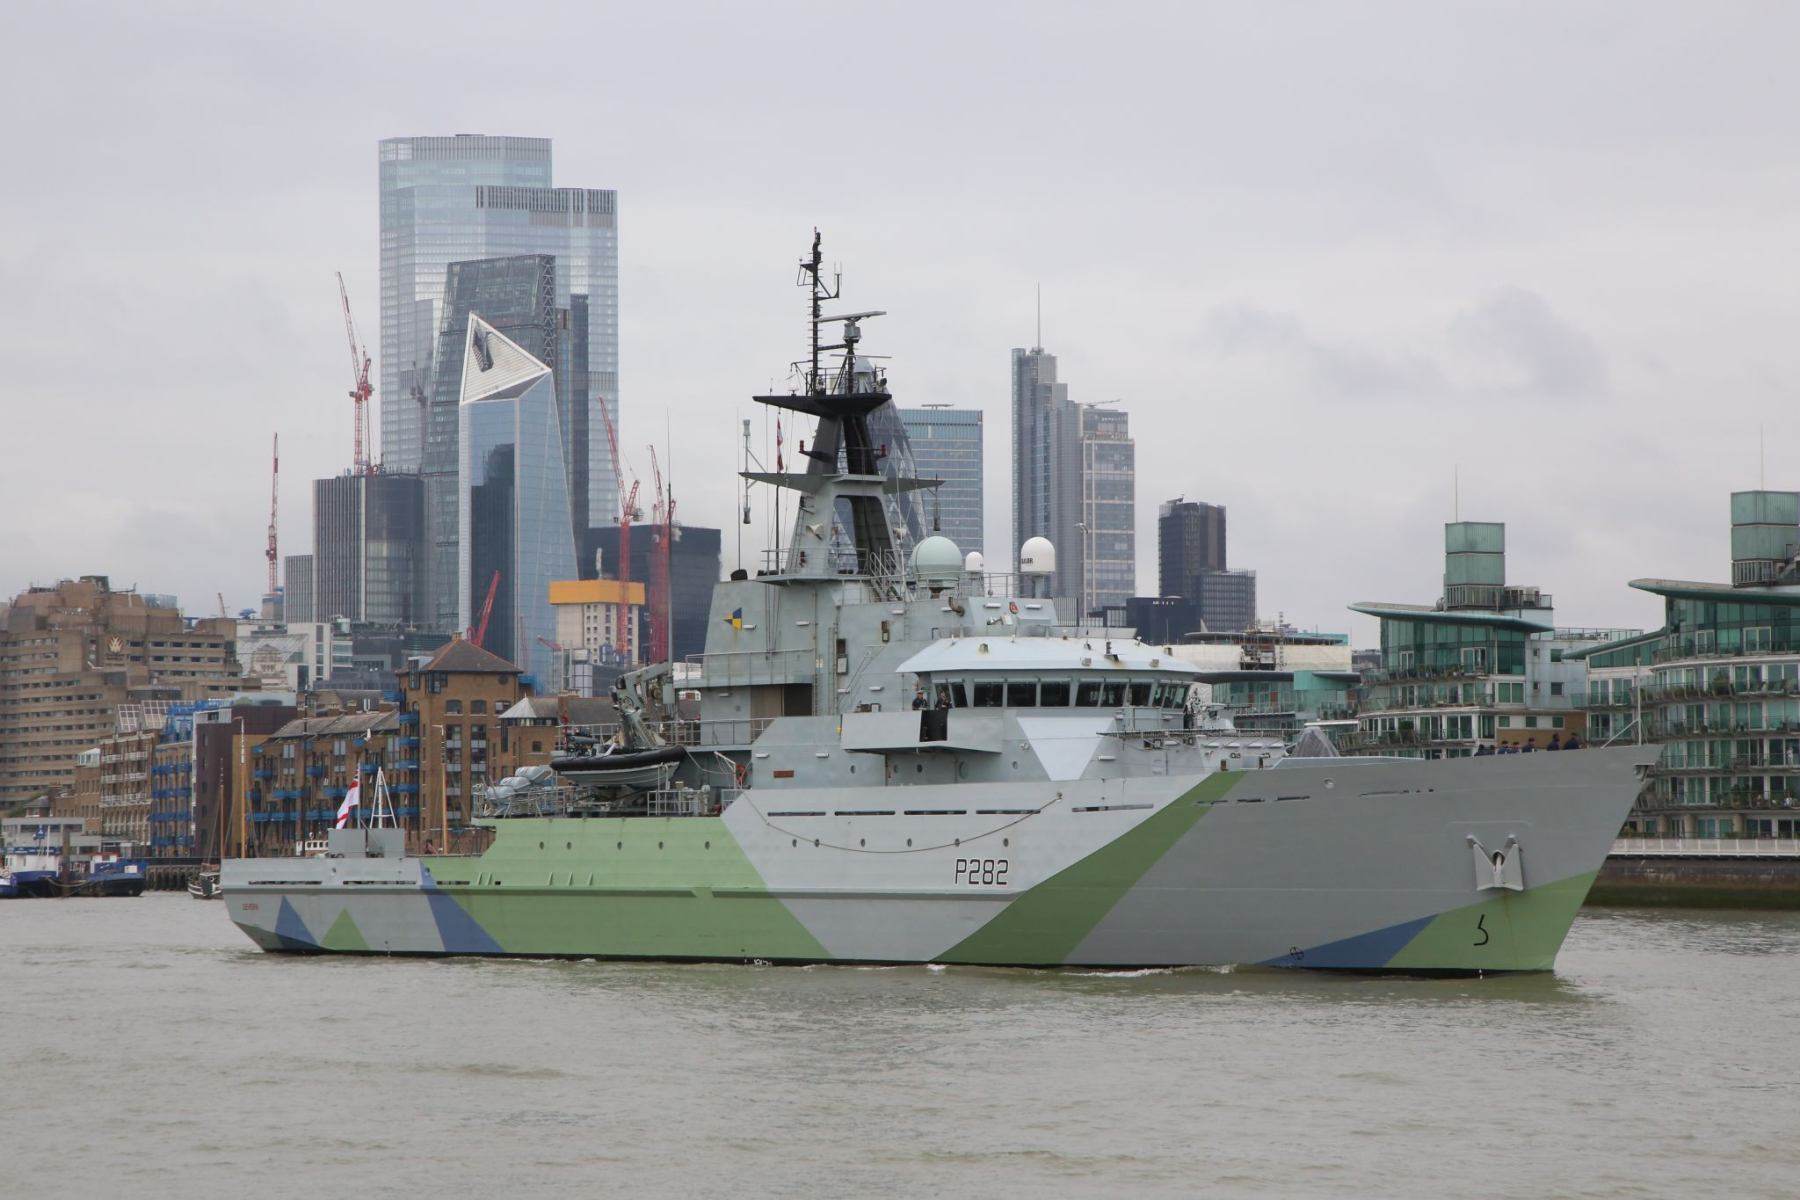 Royal Navy P282 HMS Severn leaving London sailing down the River Thames in Western Approaches camouflage on  11-Sep-2021, City of London in background.